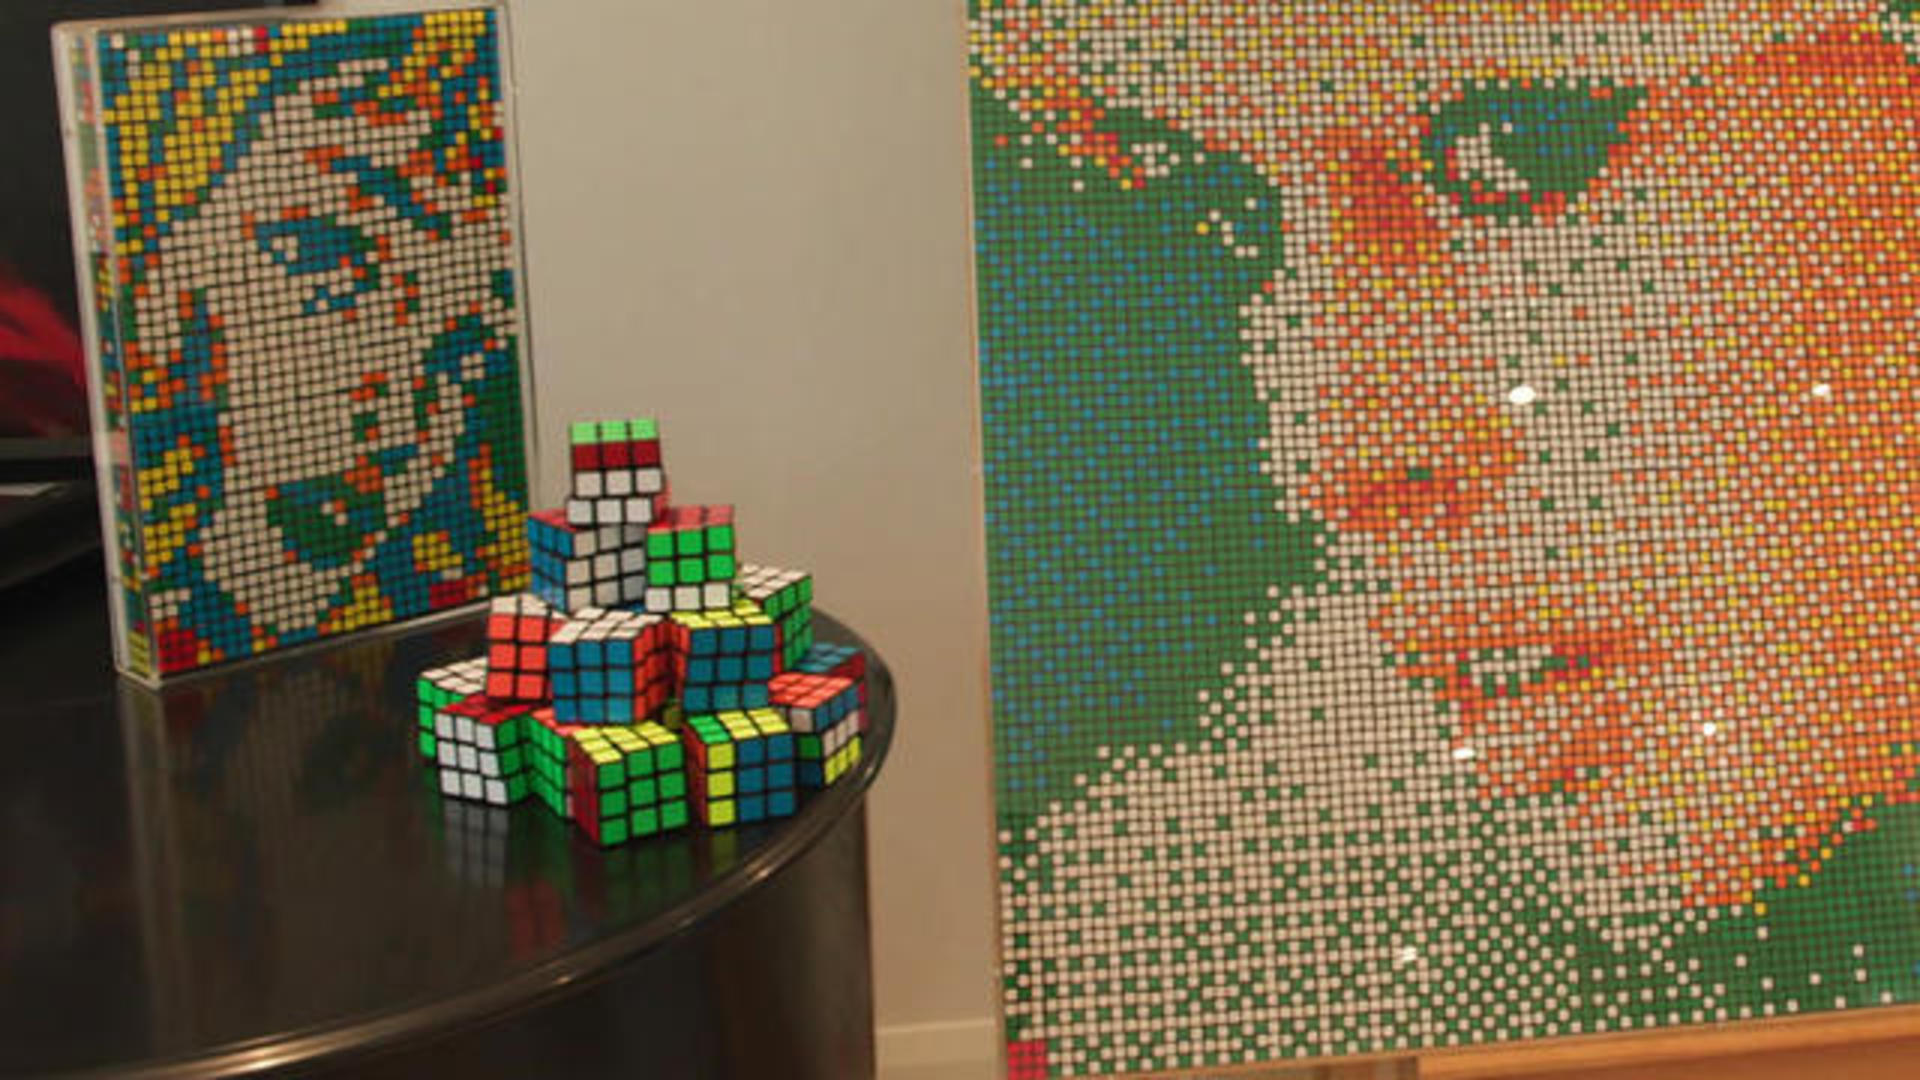 Rubik's Cube Inventor Opens Up About His Creation in New Book 'Cubed' - The  New York Times